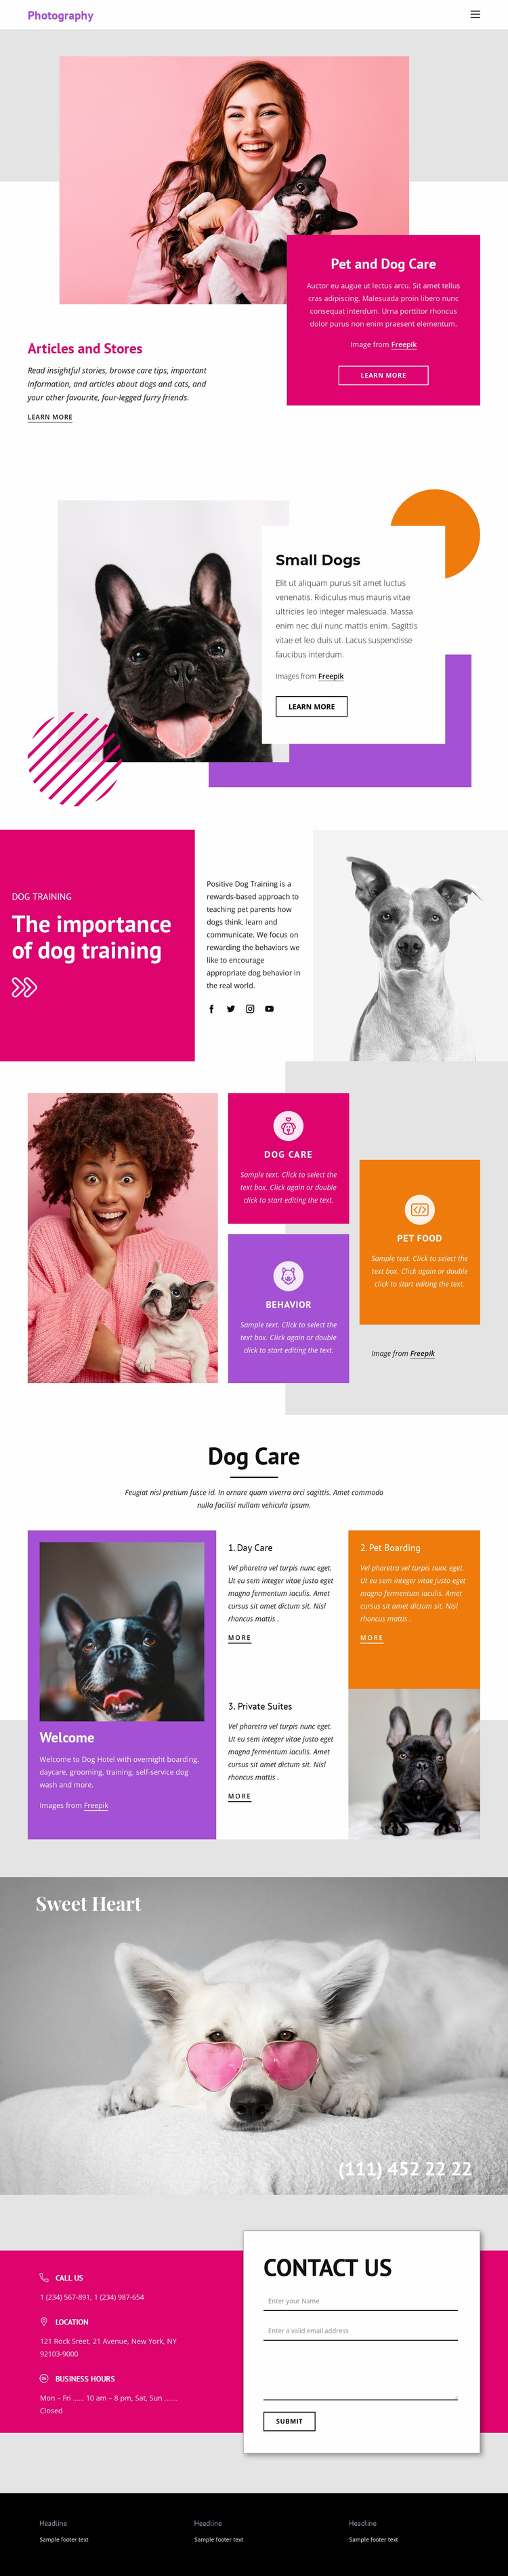 Pets Stories Landing Page